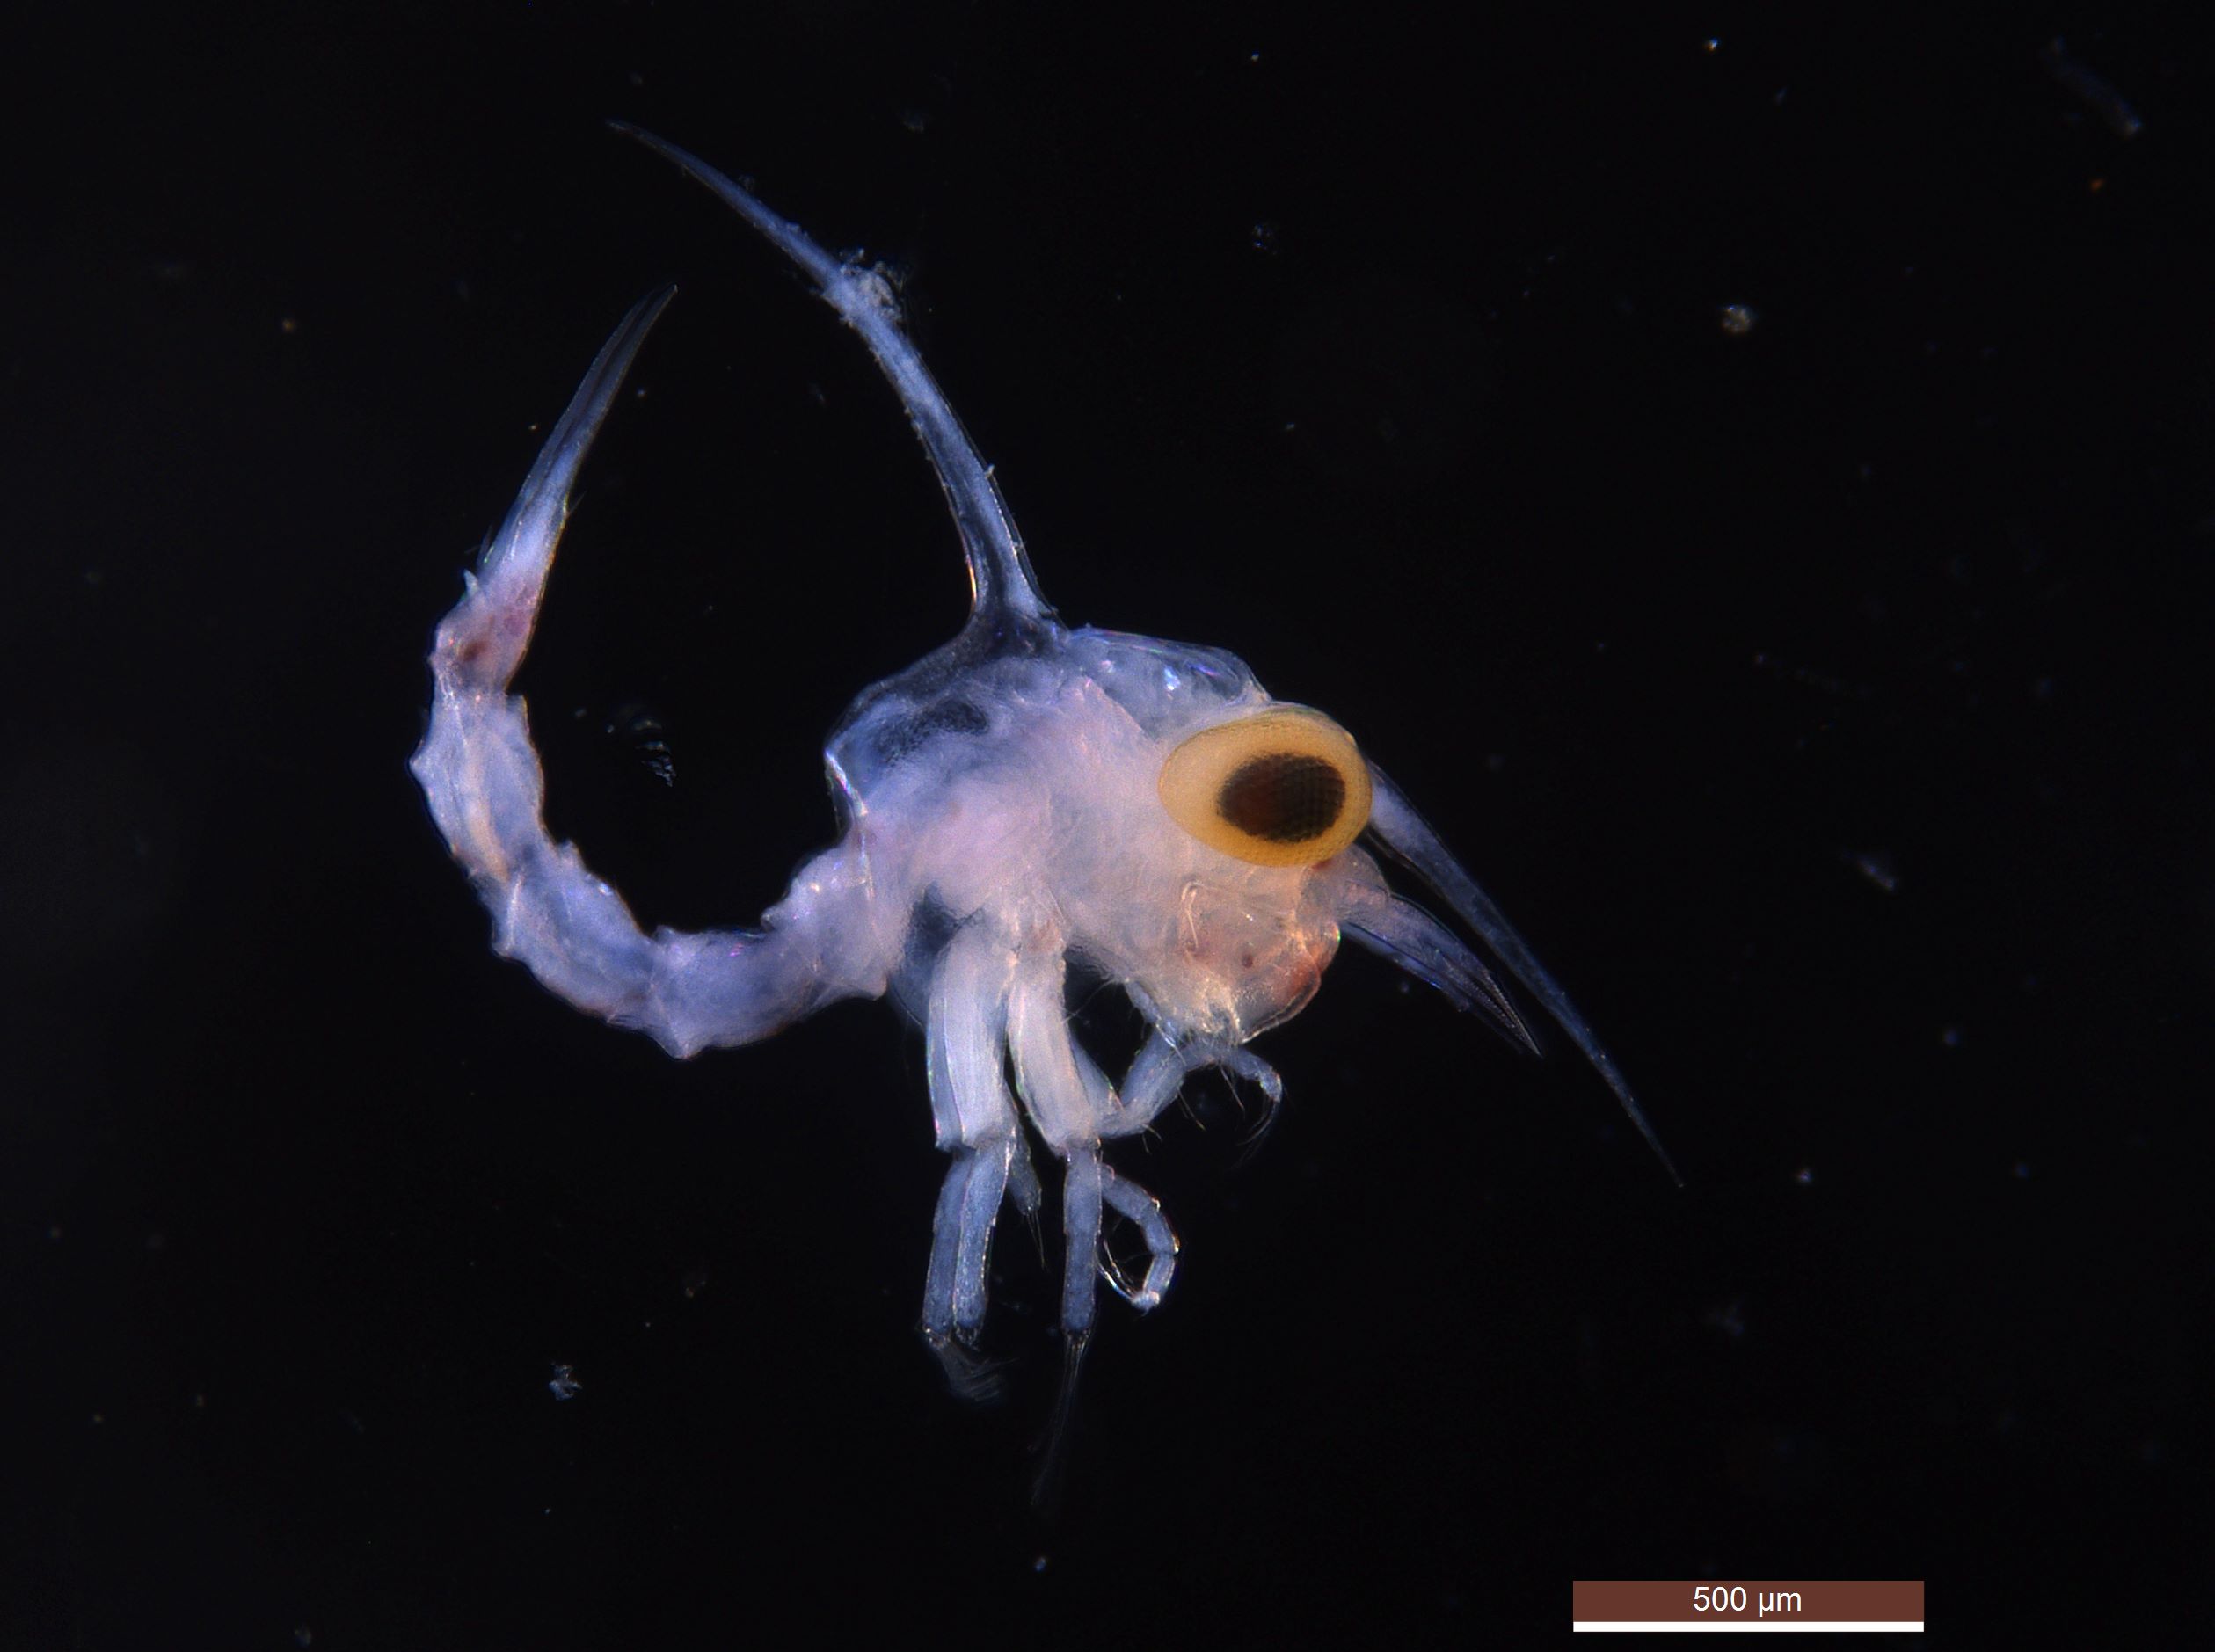 A microscopic image of a crab larvae showing a tiny translucent creature with blue-purple skin and identifiable legs  